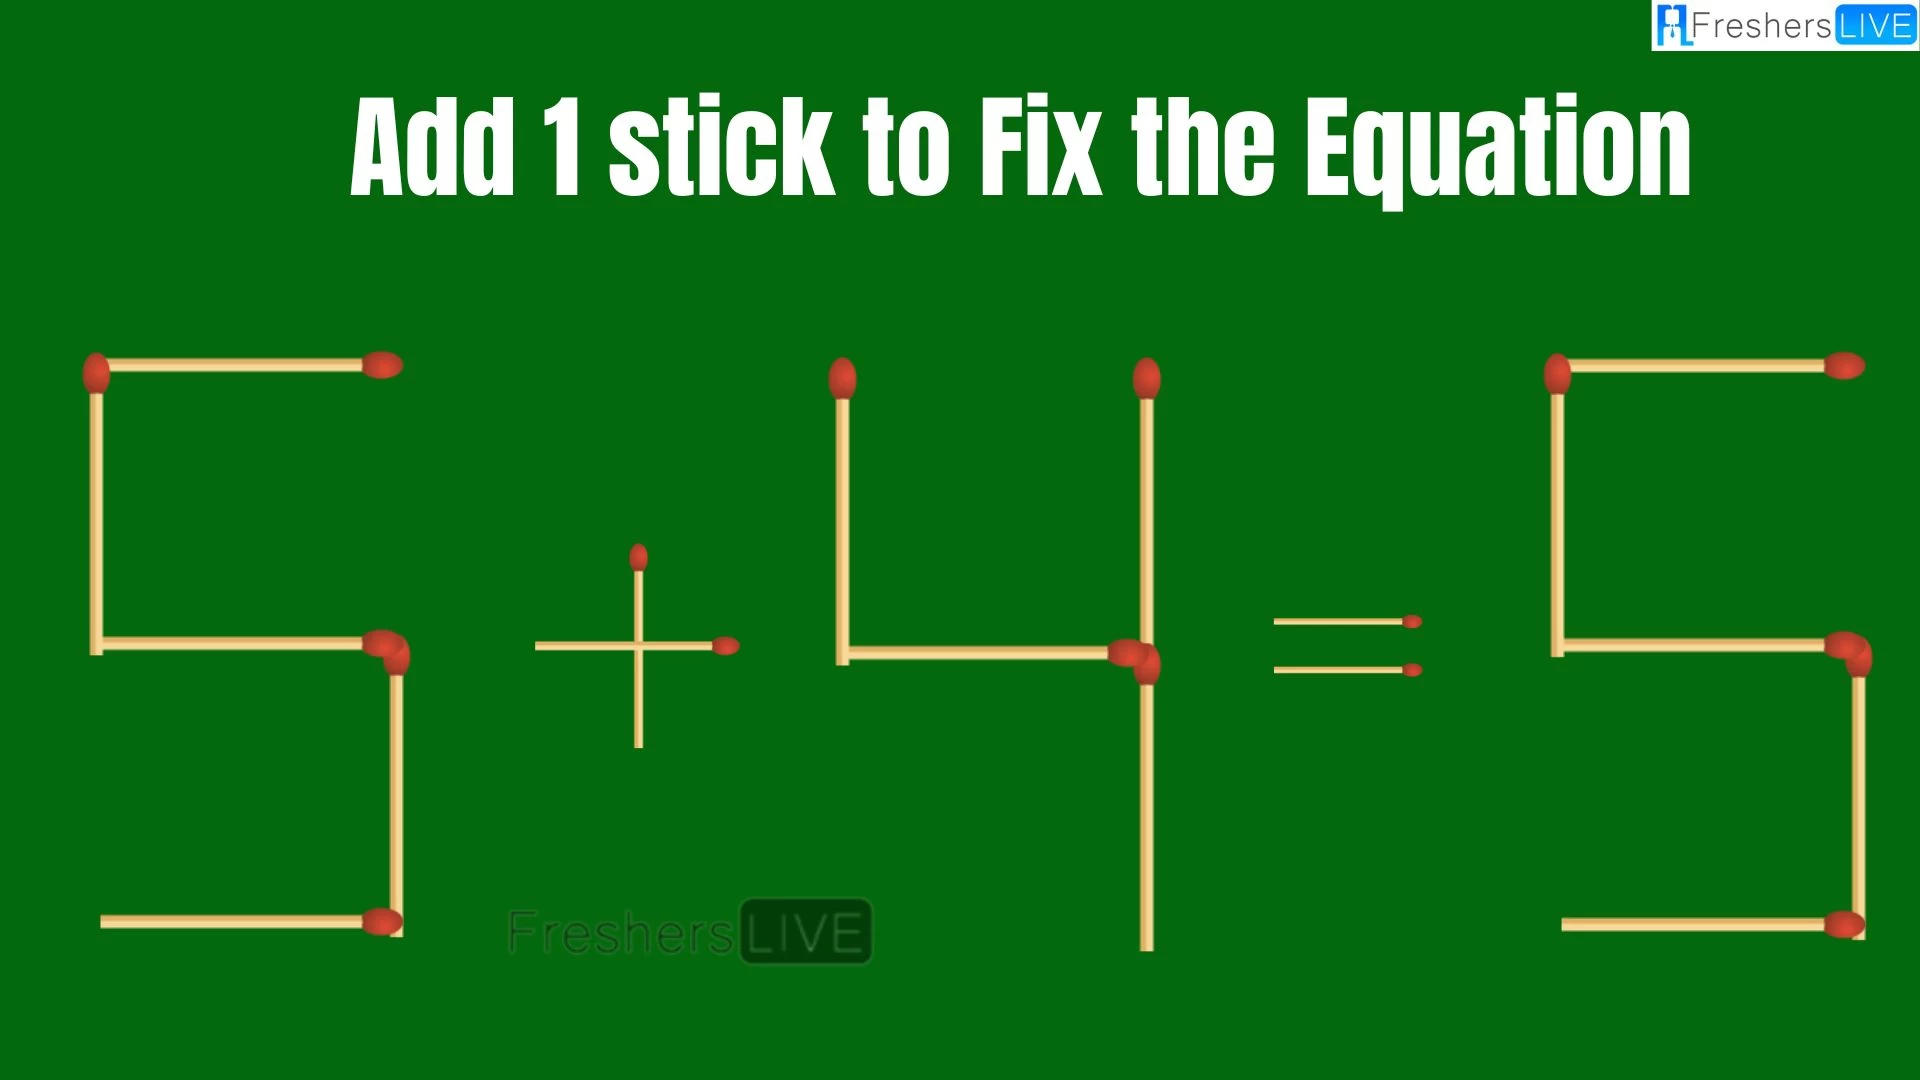 Solve the Puzzle to Transform 5+4=5 by Adding 1 Matchstick to Correct the Equation